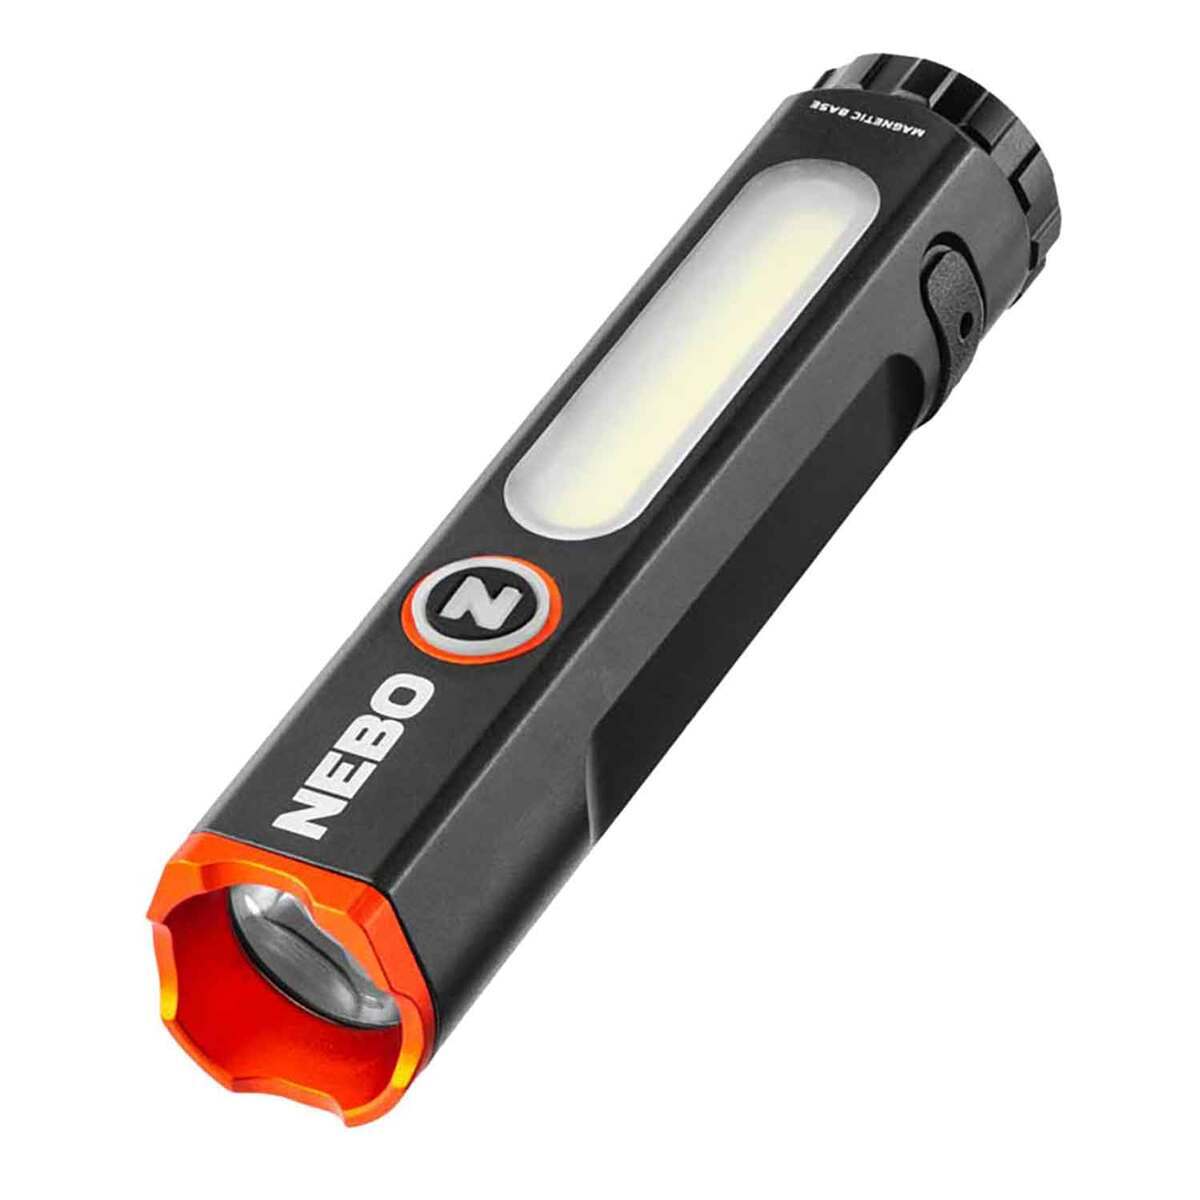 Inspector 500. Lampe torche stylo LED, rechargeable - Nebo